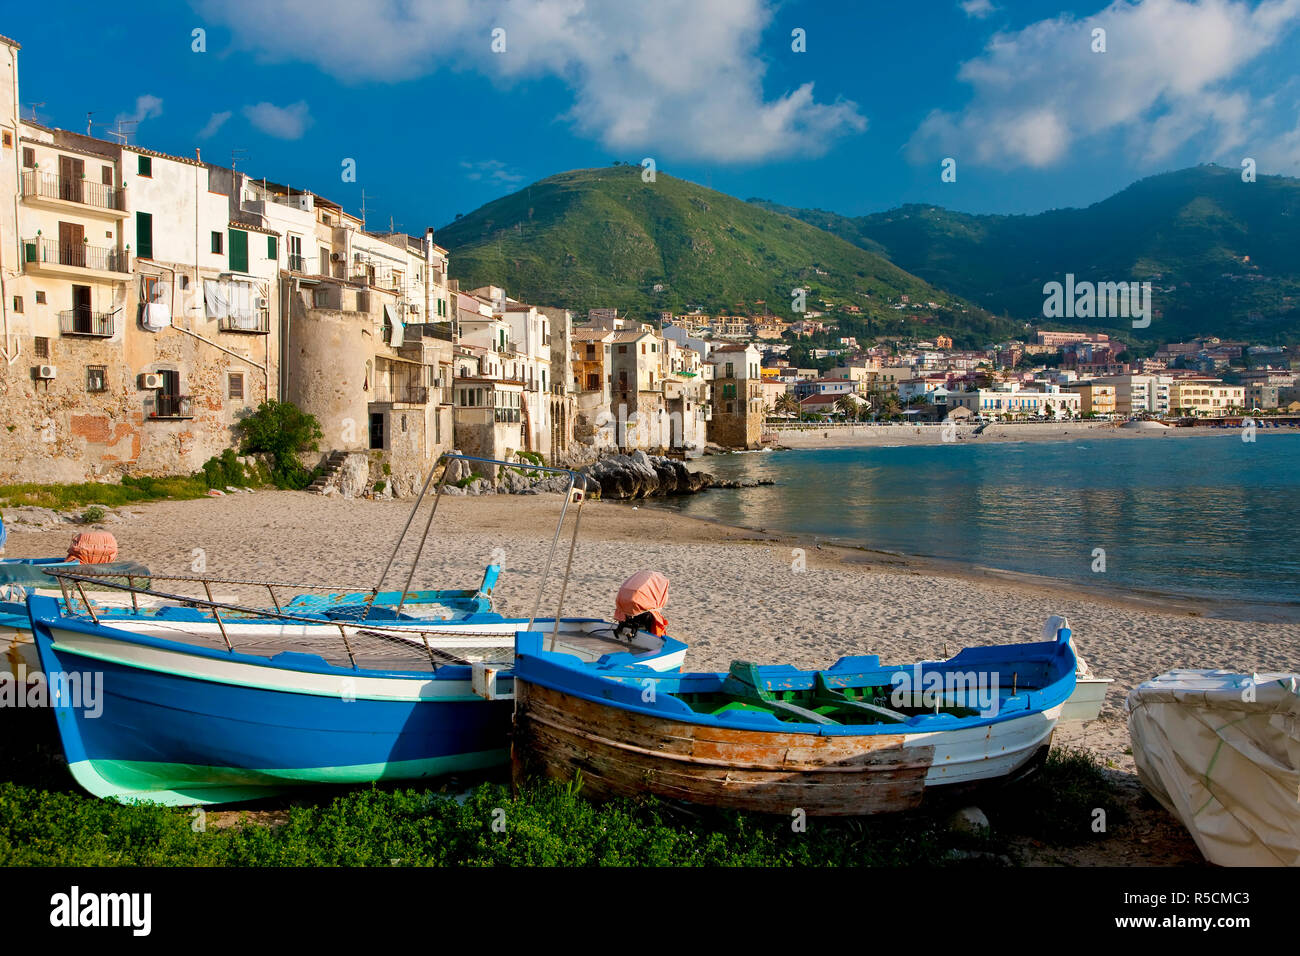 North Coast Sicily High Resolution Stock Photography and Images - Alamy